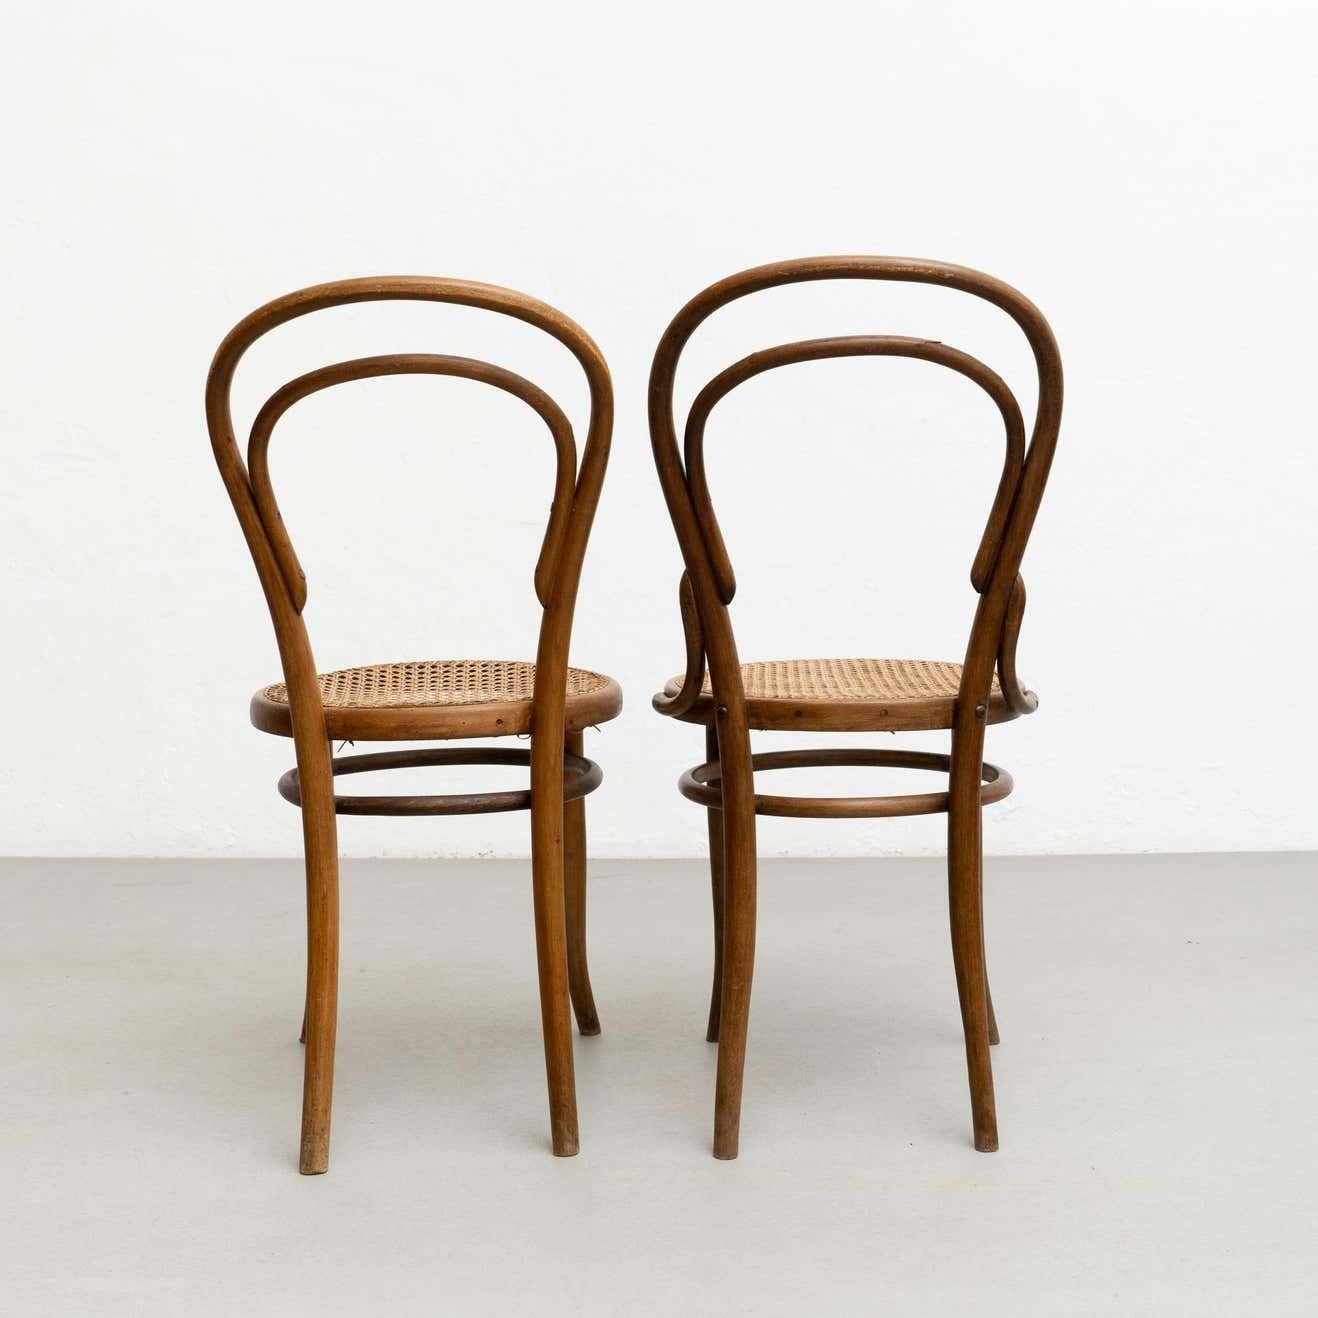 Luxembourgish Set of Two J&J Kohn Style Bentwood and Rattan Chairs, circa 1930 For Sale